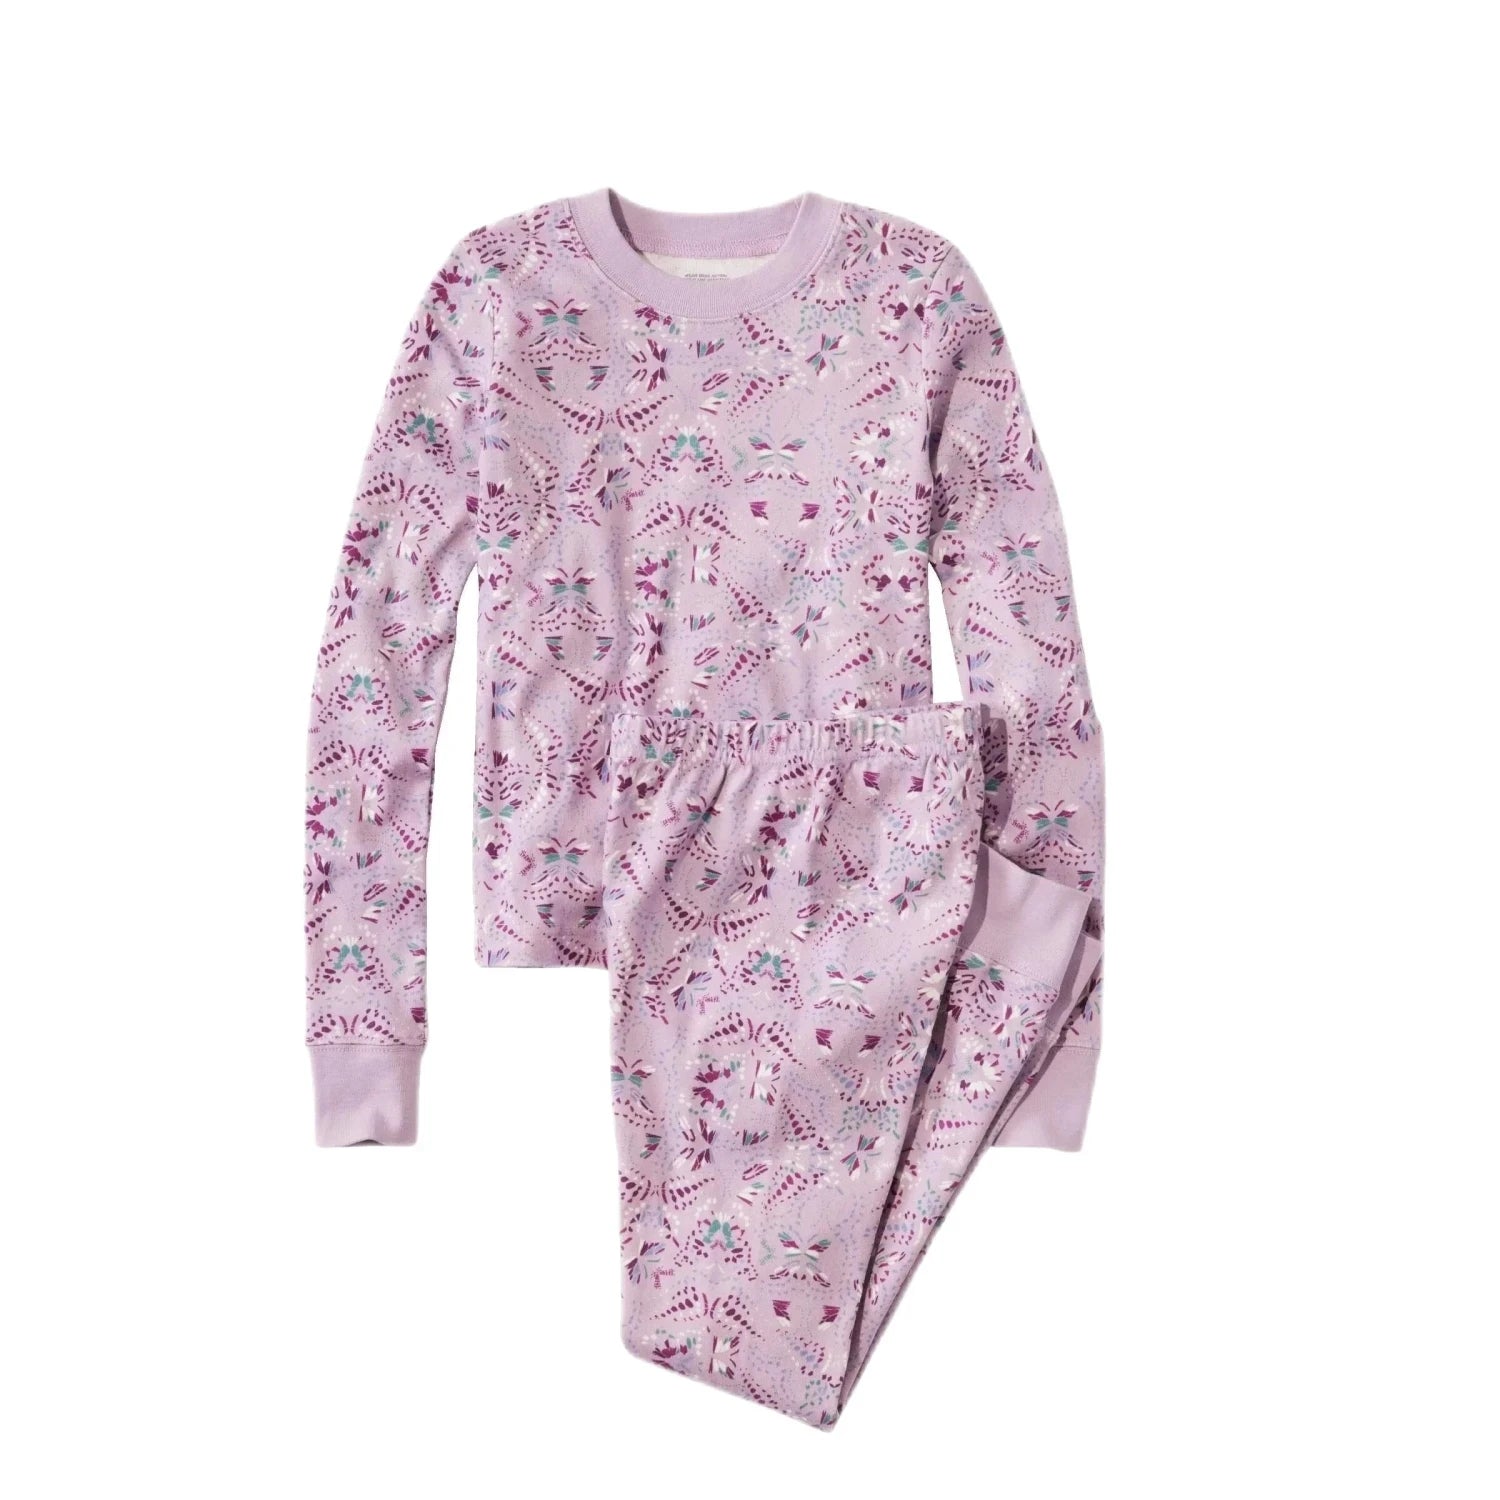 LL Bean Kid's Organic Cotton Fitted Pajamas shown in the Lavender Ice Butterfly, front view.